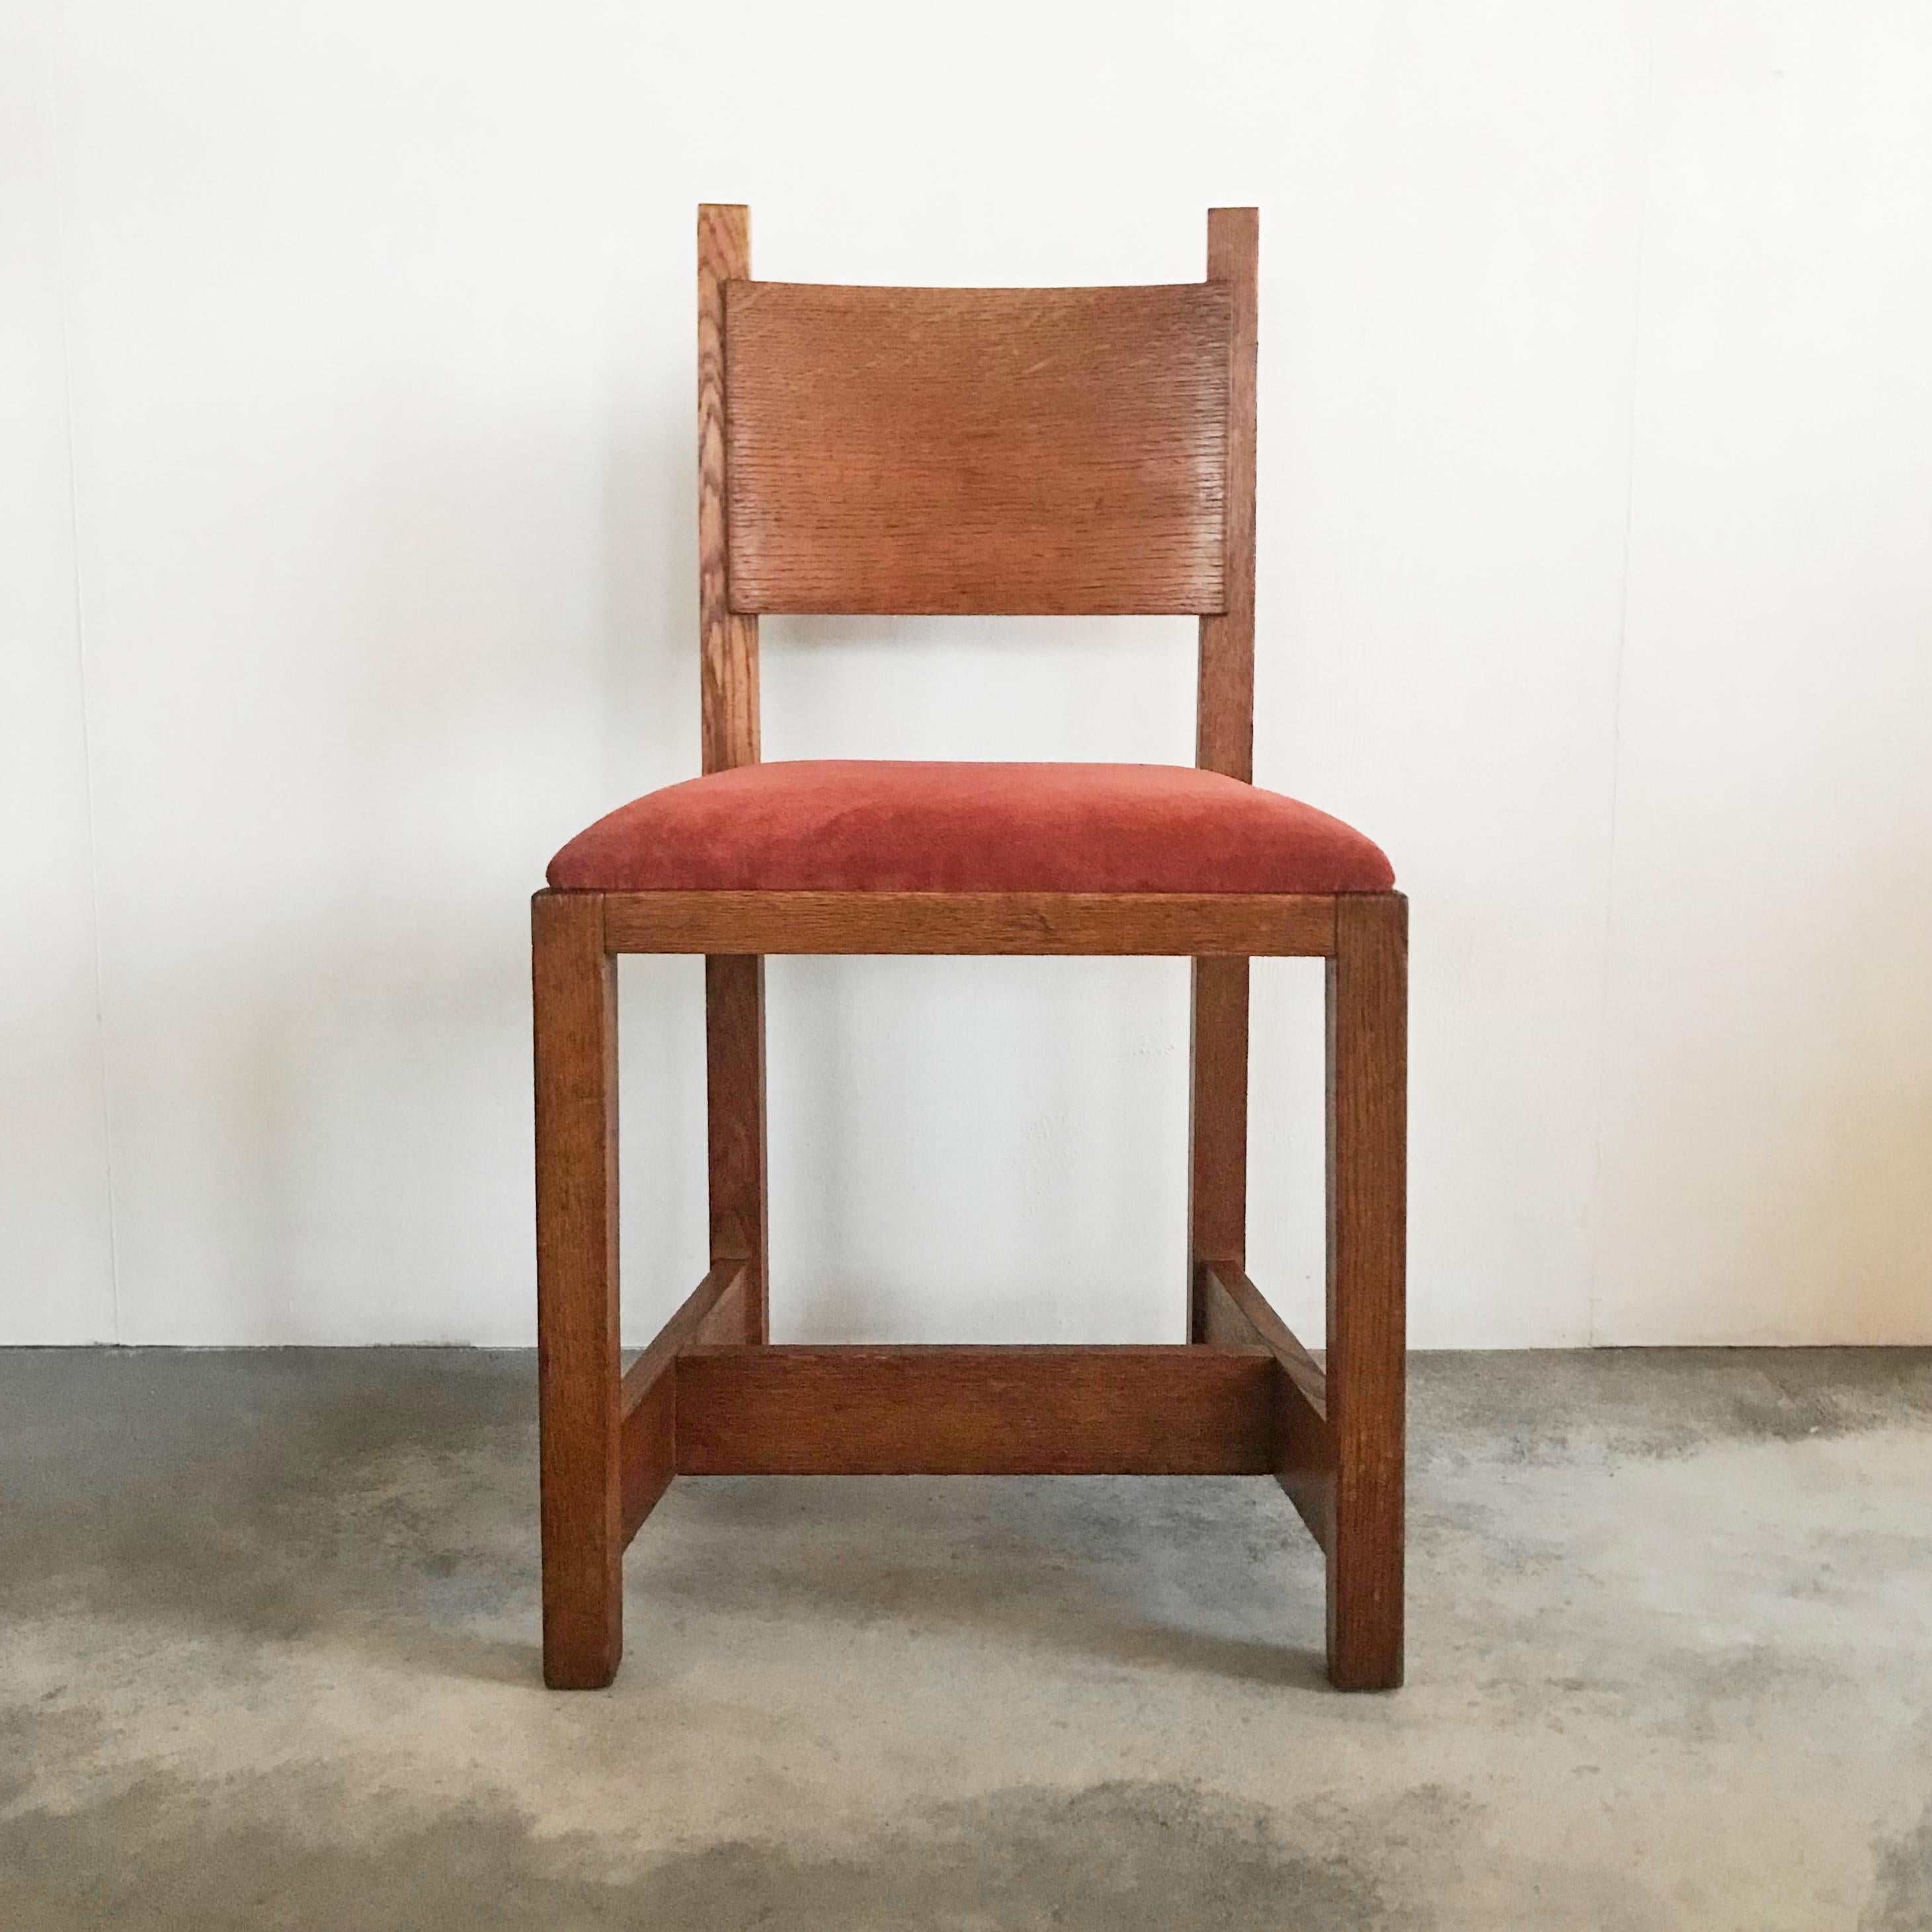 'Haagse School' Side Chair by Pander, The Netherlands, 1930s.

Beautiful side chair in oak and velvet manufactured by H. Pander in a distinct 'Haagse School' or 'Hague School' style. Great proportions and shapes, very modern for the time it was